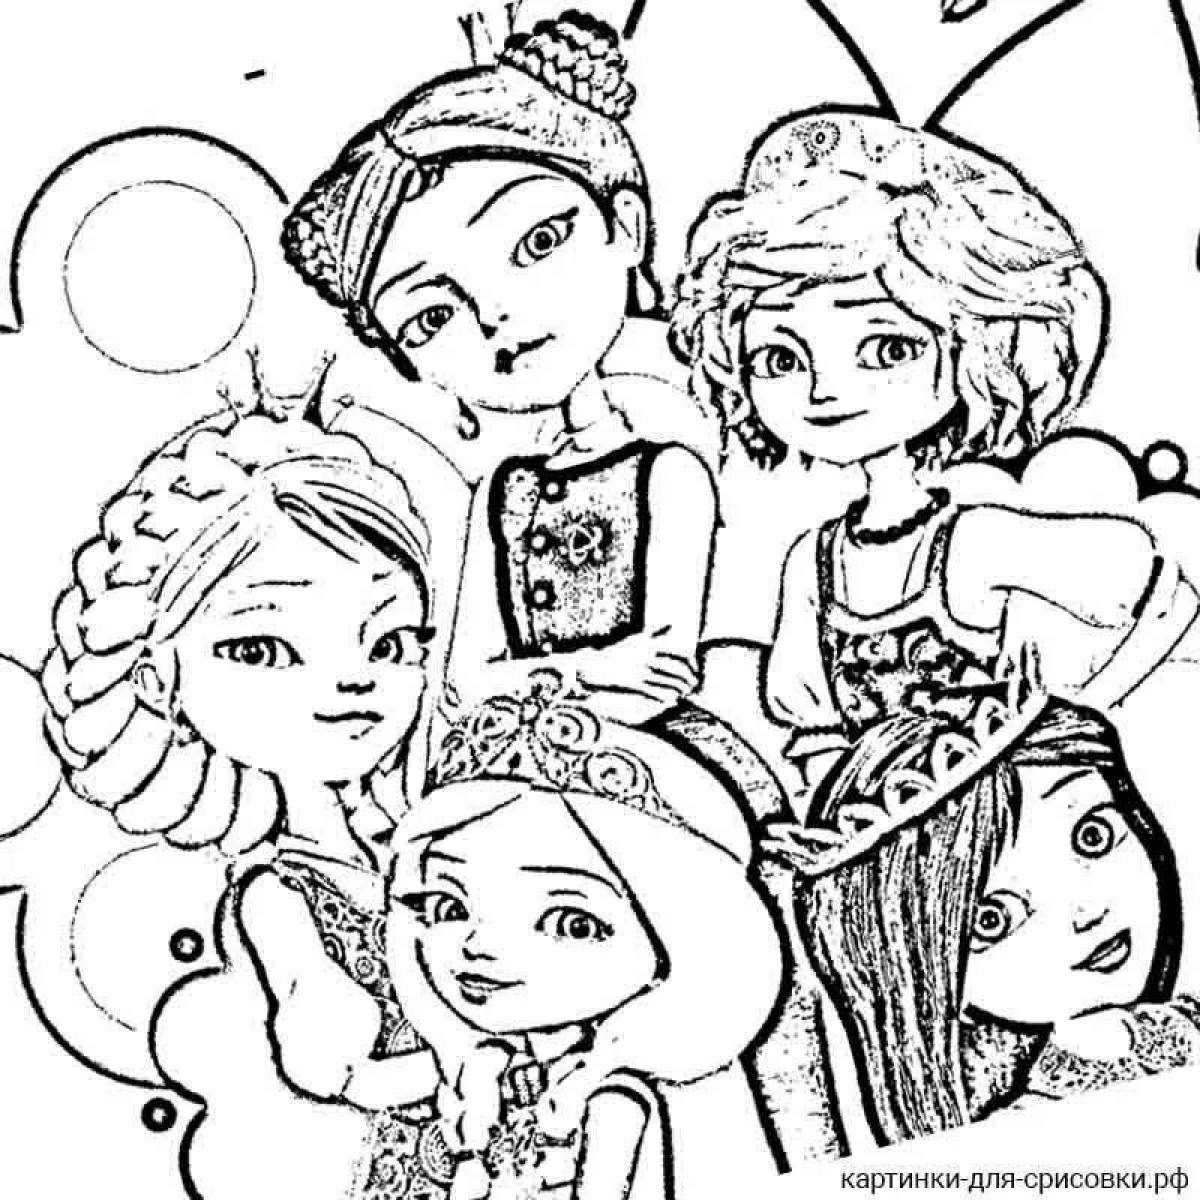 Princess coloring pages for girls